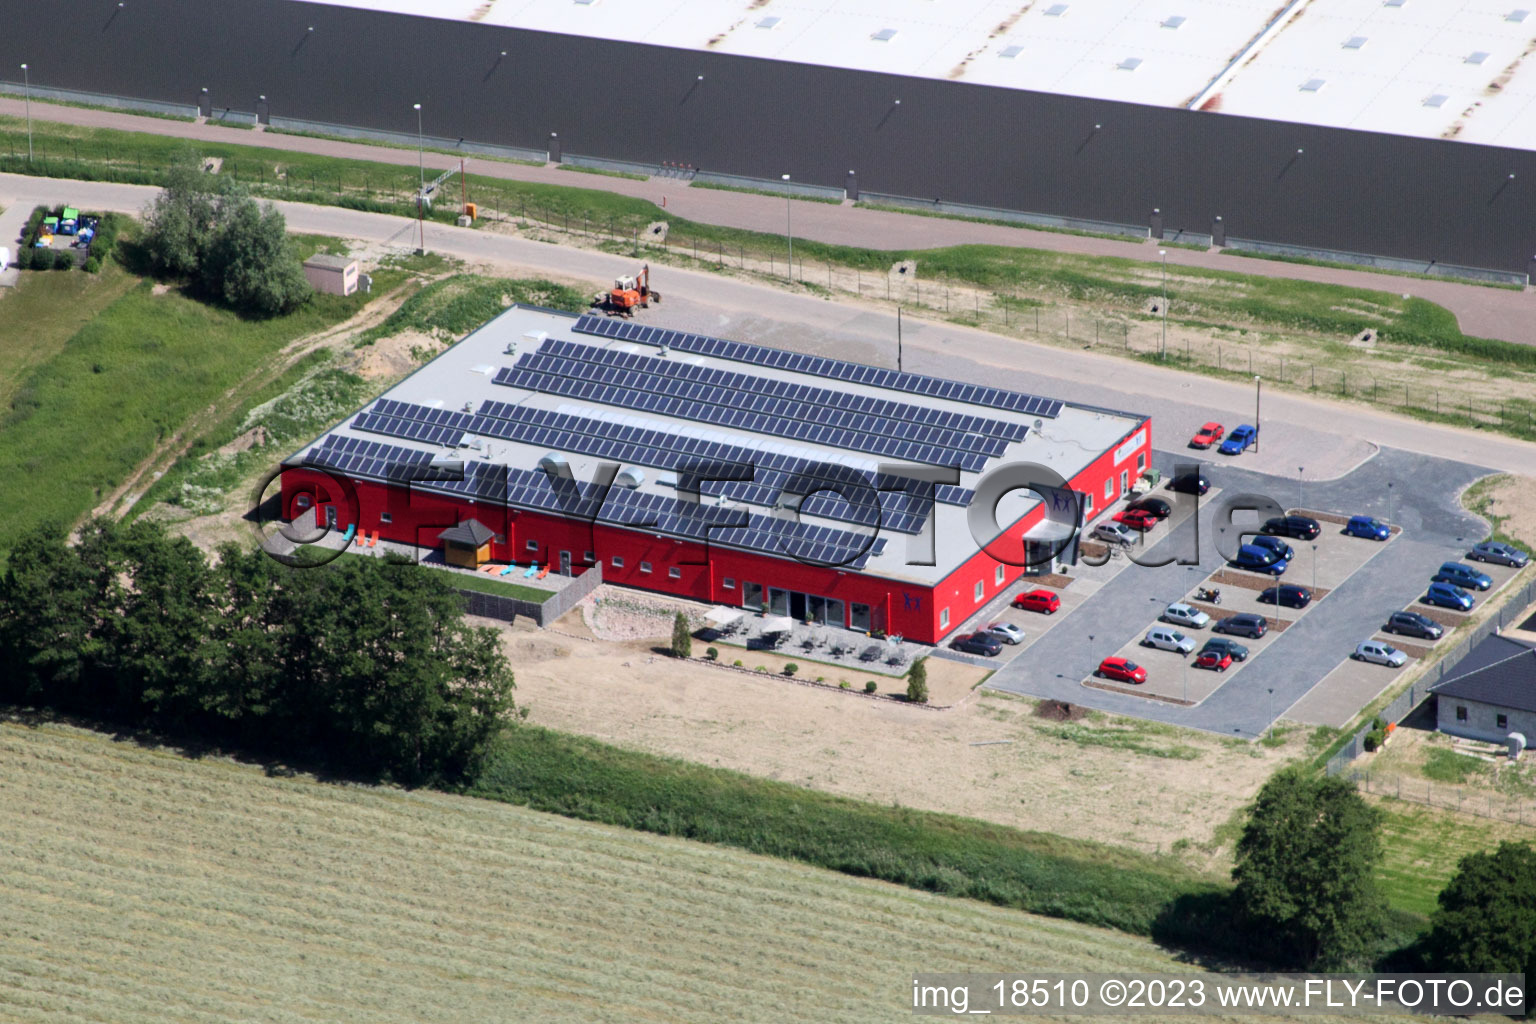 Bienwald Fitness World in the district Minderslachen in Kandel in the state Rhineland-Palatinate, Germany from above